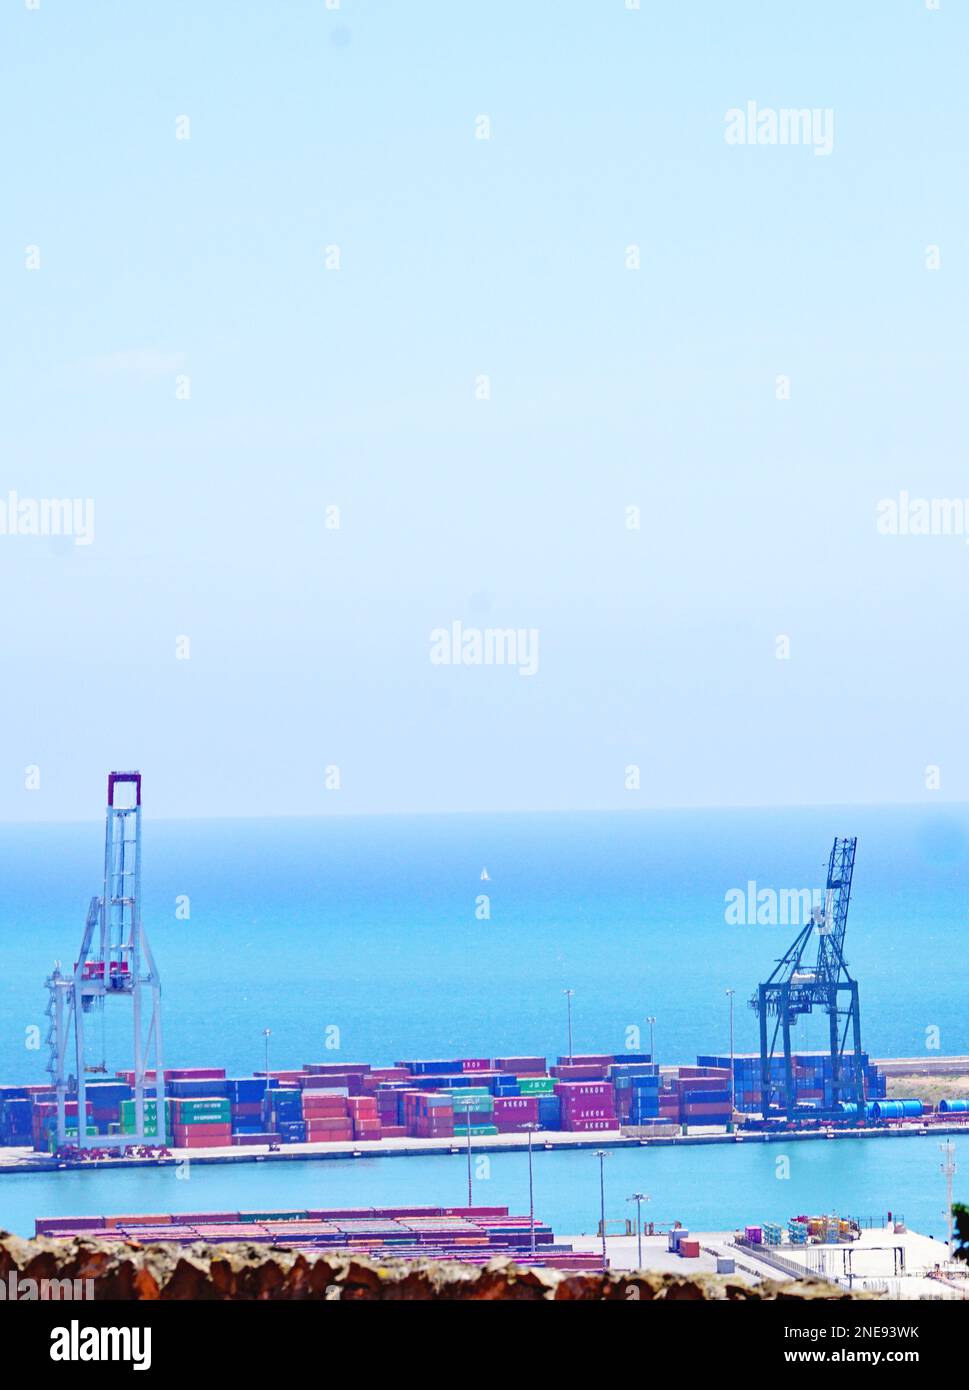 Containers and cranes in the industrial area of the port of Barcelona, Catalunya, Spain, Europe Stock Photo